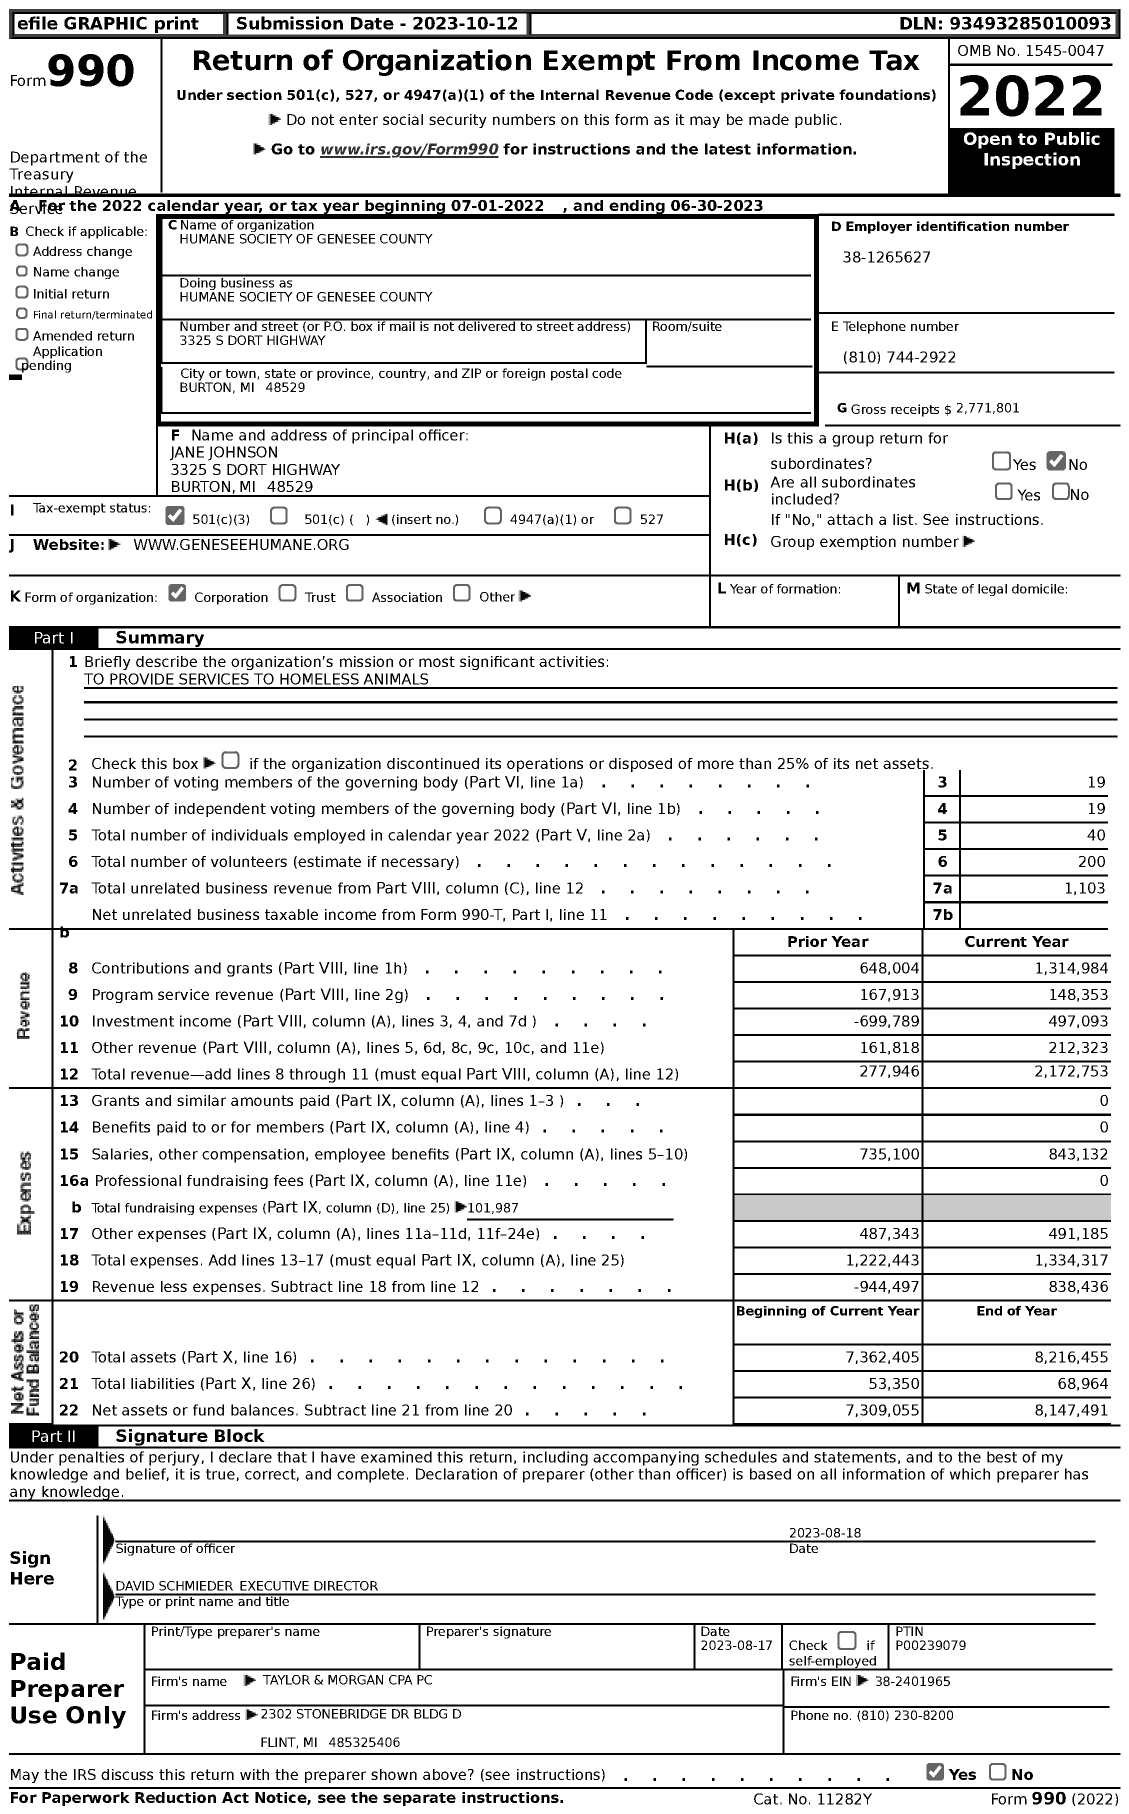 Image of first page of 2022 Form 990 for Humane Society of Genesee County (HSGC)